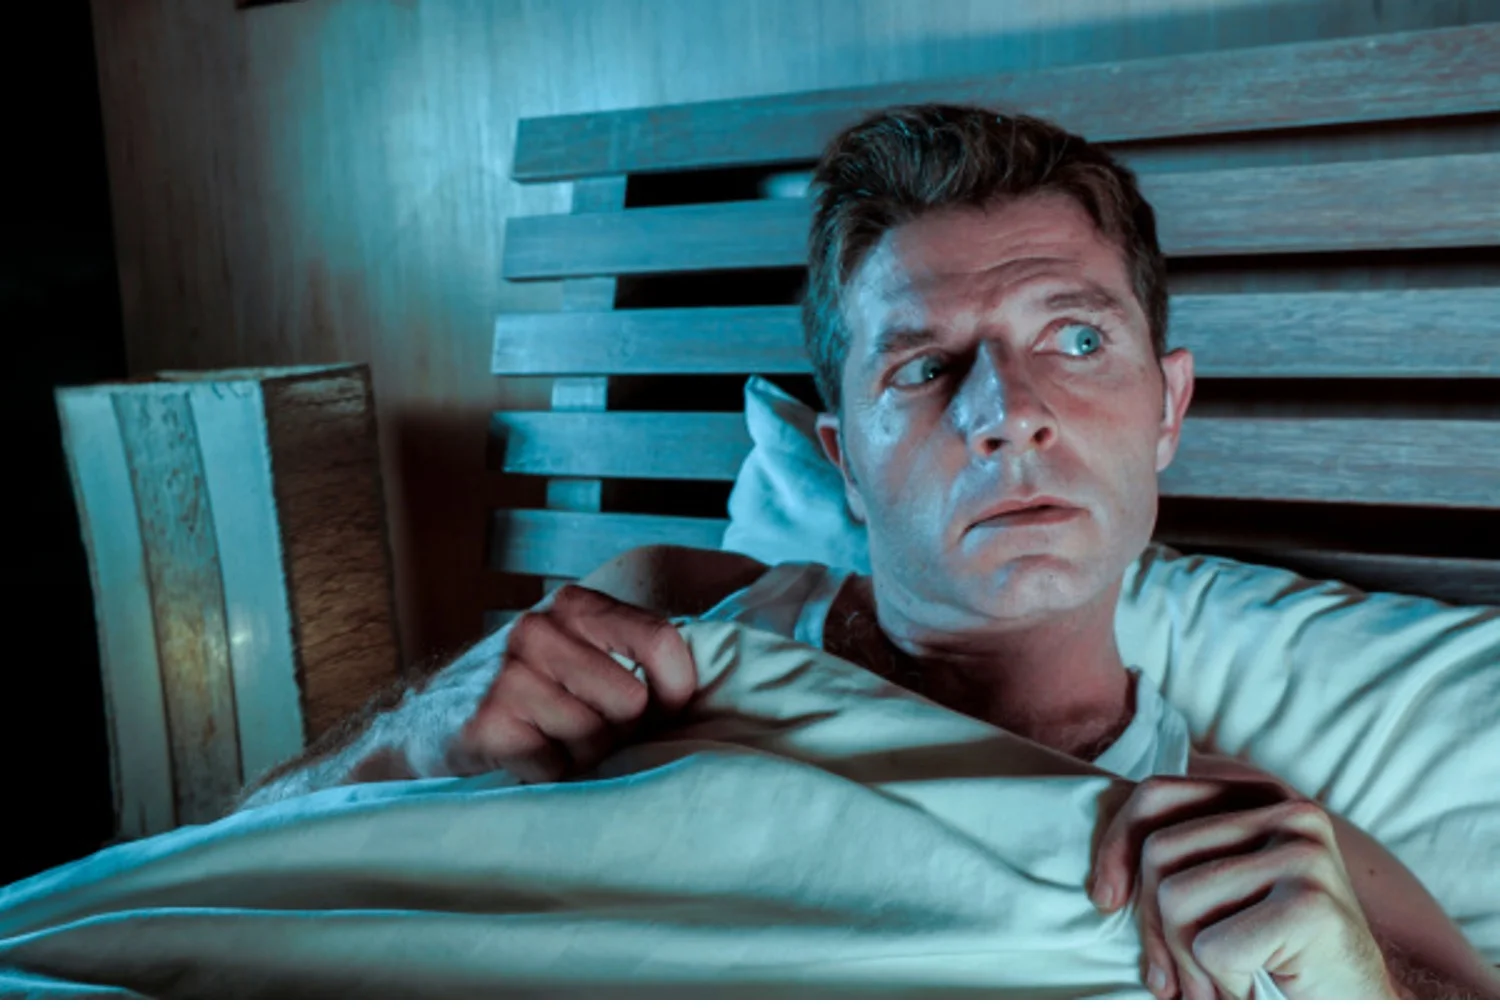 Paranoid man sits awake in bed looking suspiciously around